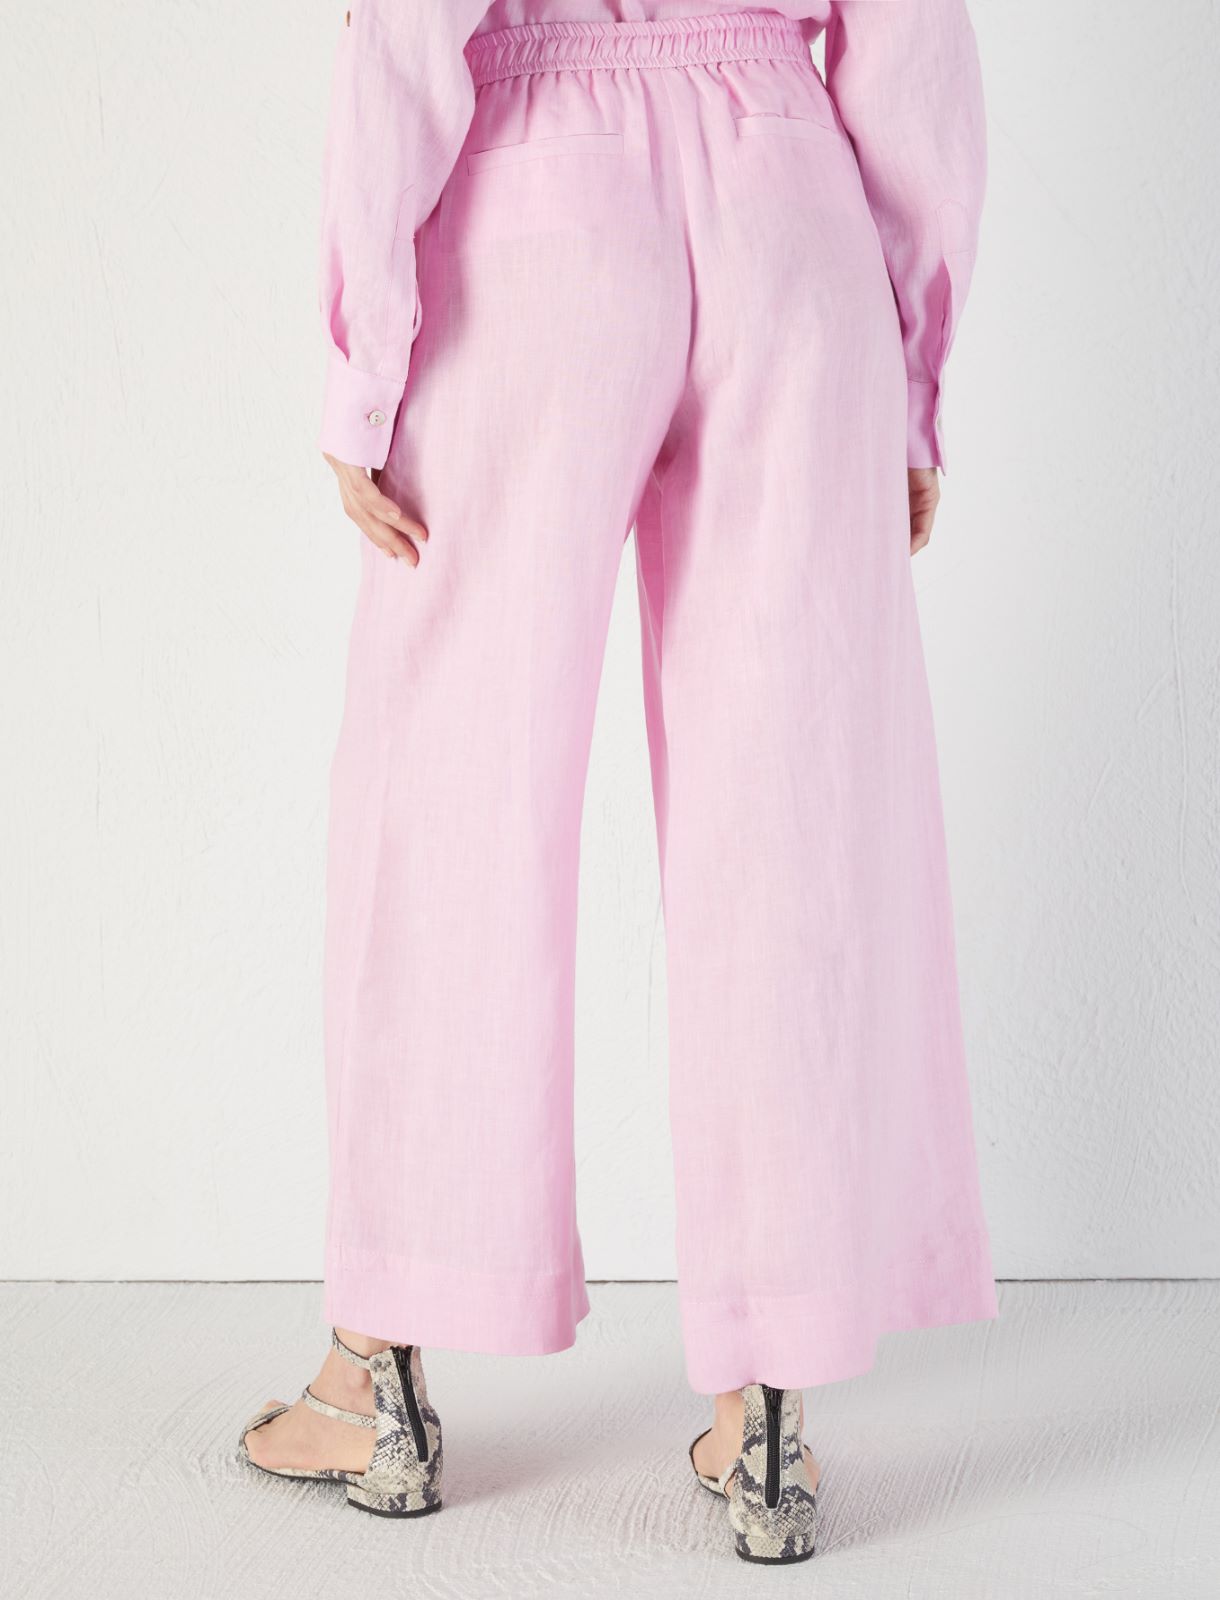 Linen trousers, pink | Marella